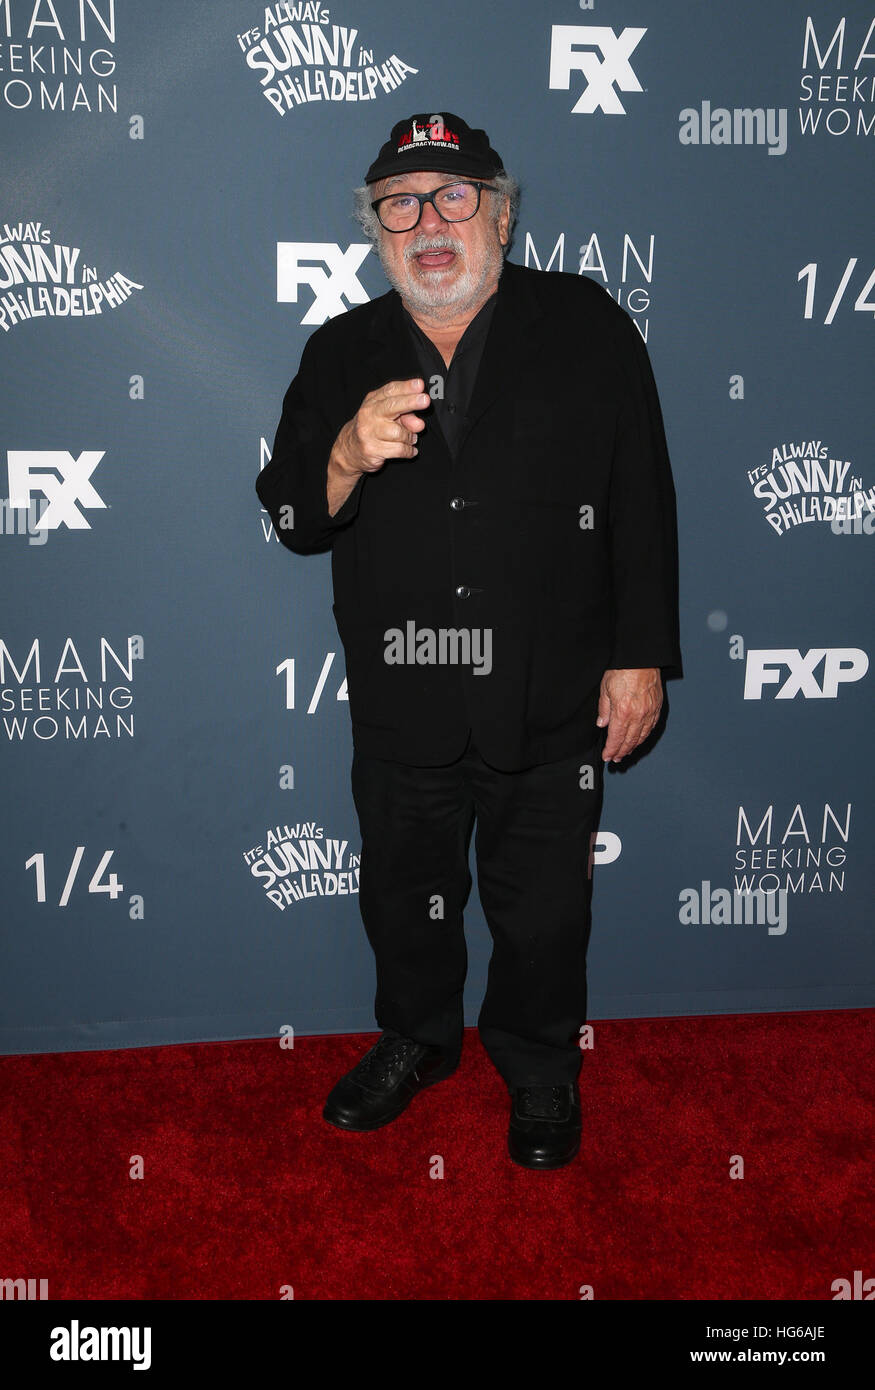 Westwood, California, USA. 03rd Jan, 2017. Danny DeVito, at premiere of FXX's "It's Always Sunny In Philadelphia" Season 12 And "Man Seeking Woman" Season 3, At The Fox Bruin Theatre In California on January 03, 2017. © Faye Sadou/Media Punch/Alamy Live News Stock Photo